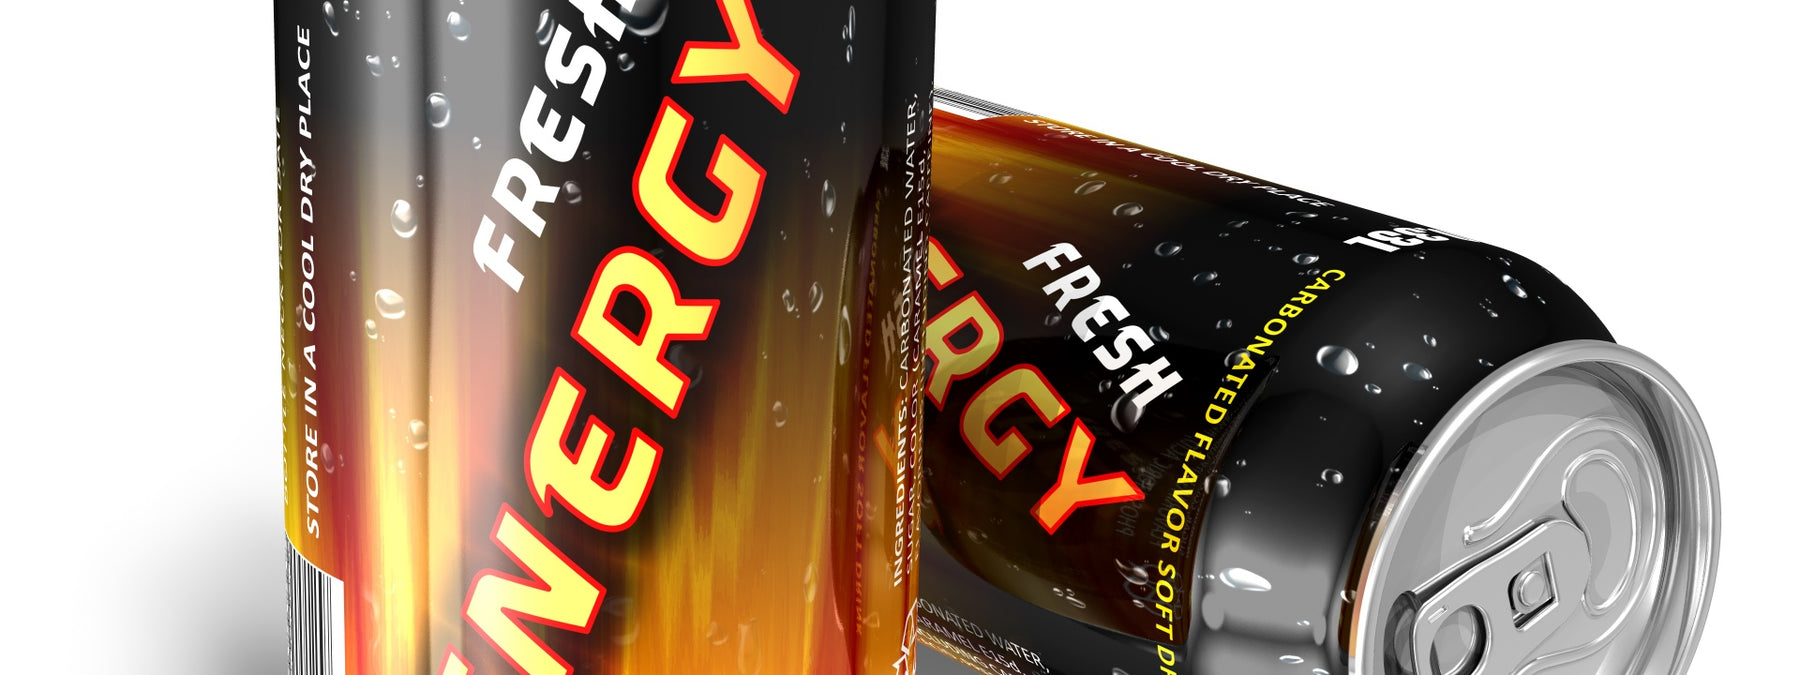 Healthy Energy Drinks: Do They Exist?